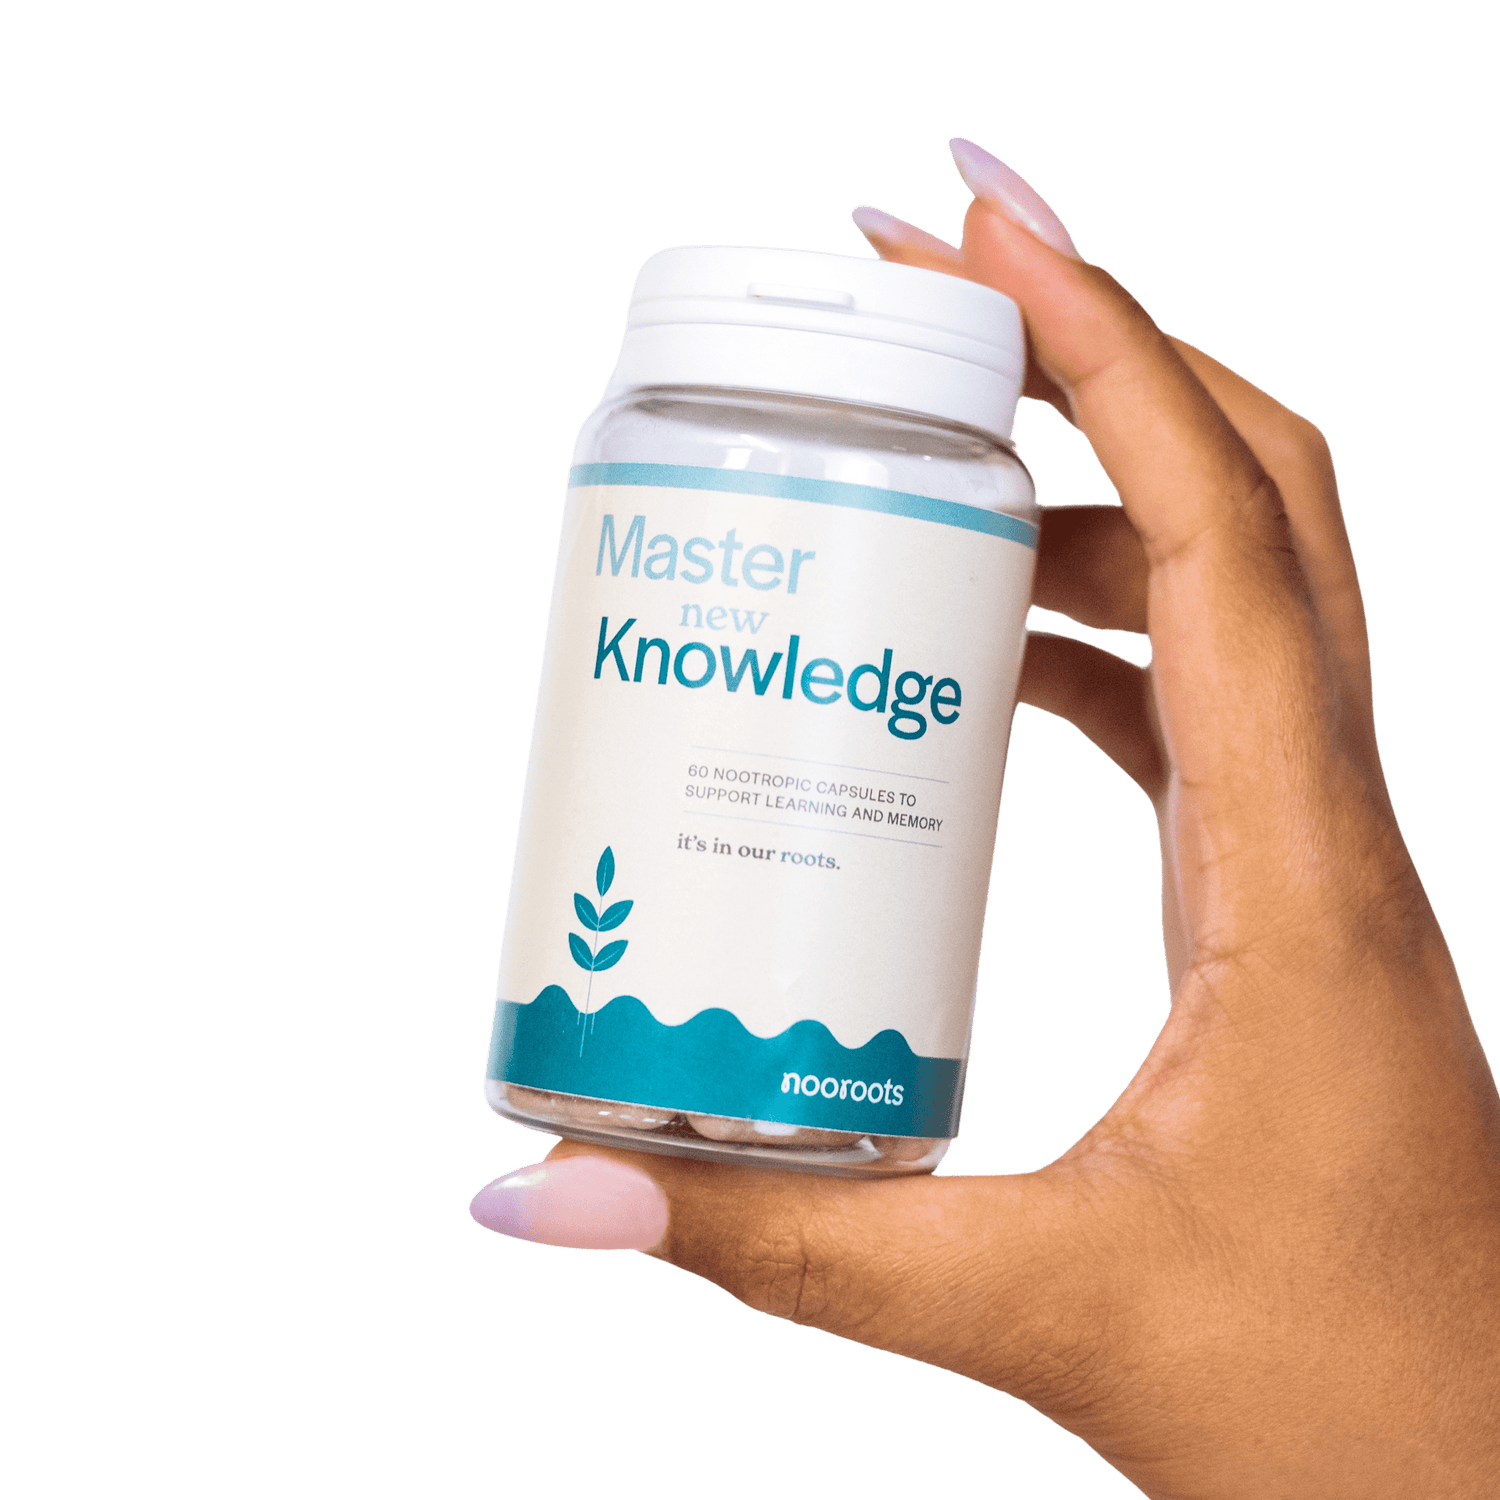 bottle in hand learning and memory nooroots nootropic supplement